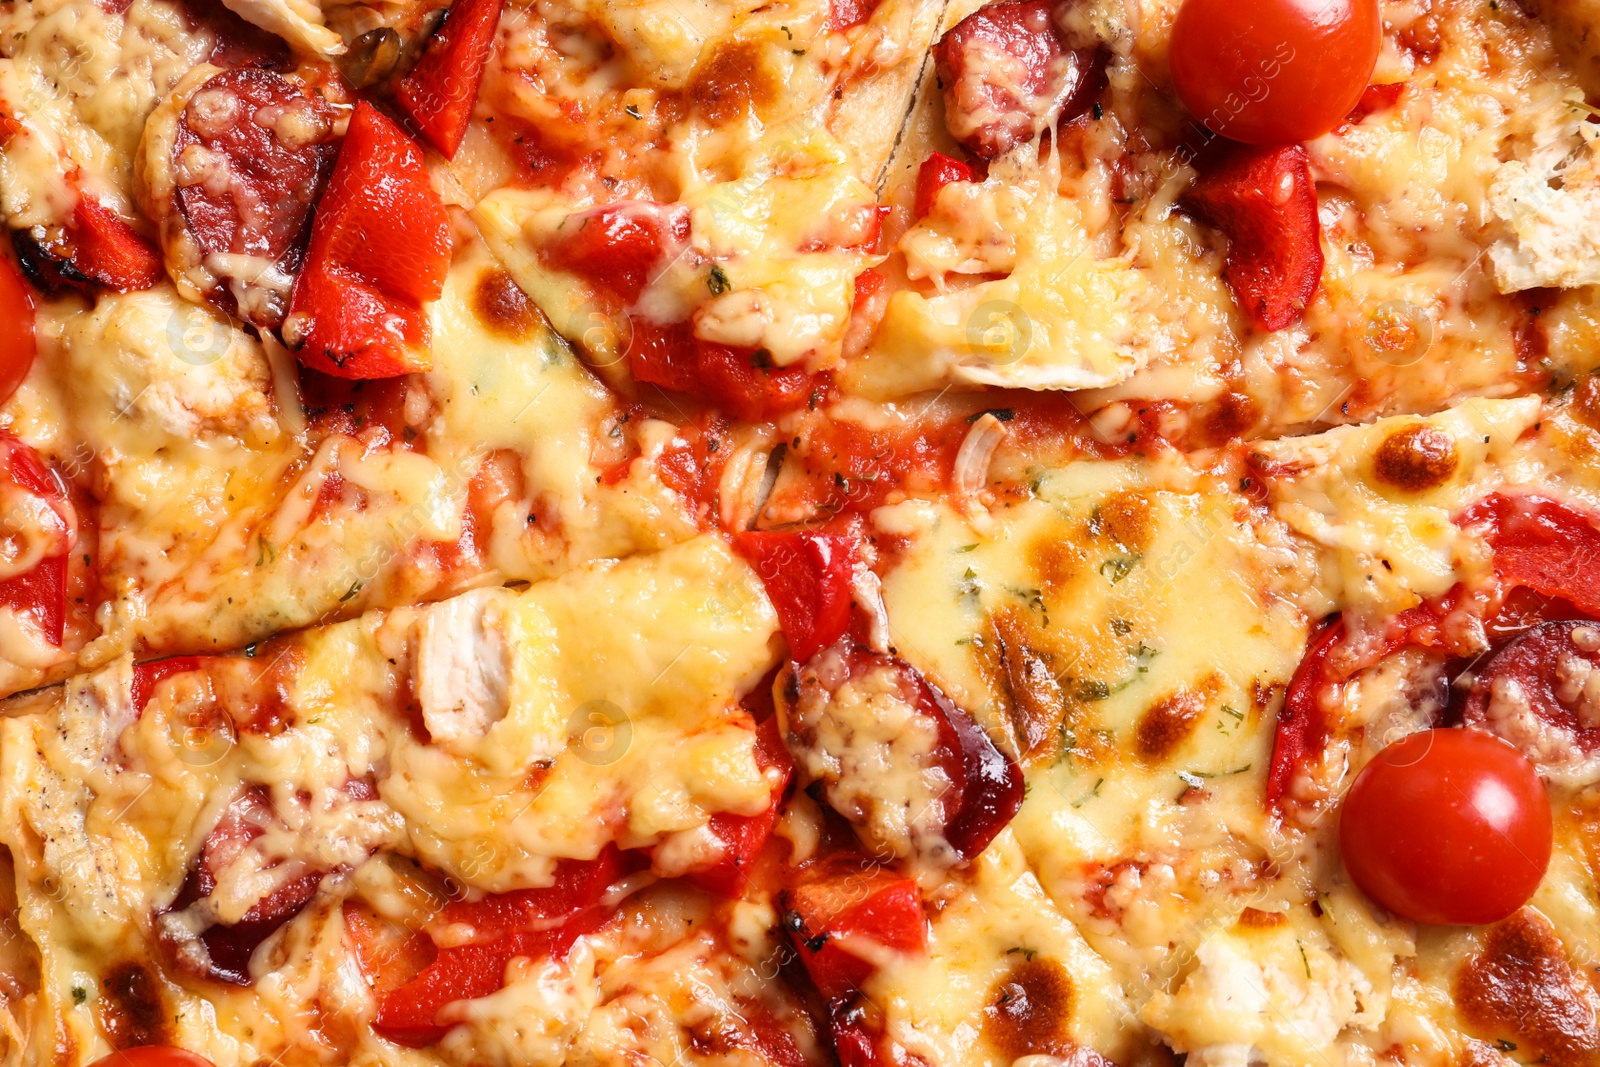 Photo of Delicious pizza with sausages and tomatoes, closeup